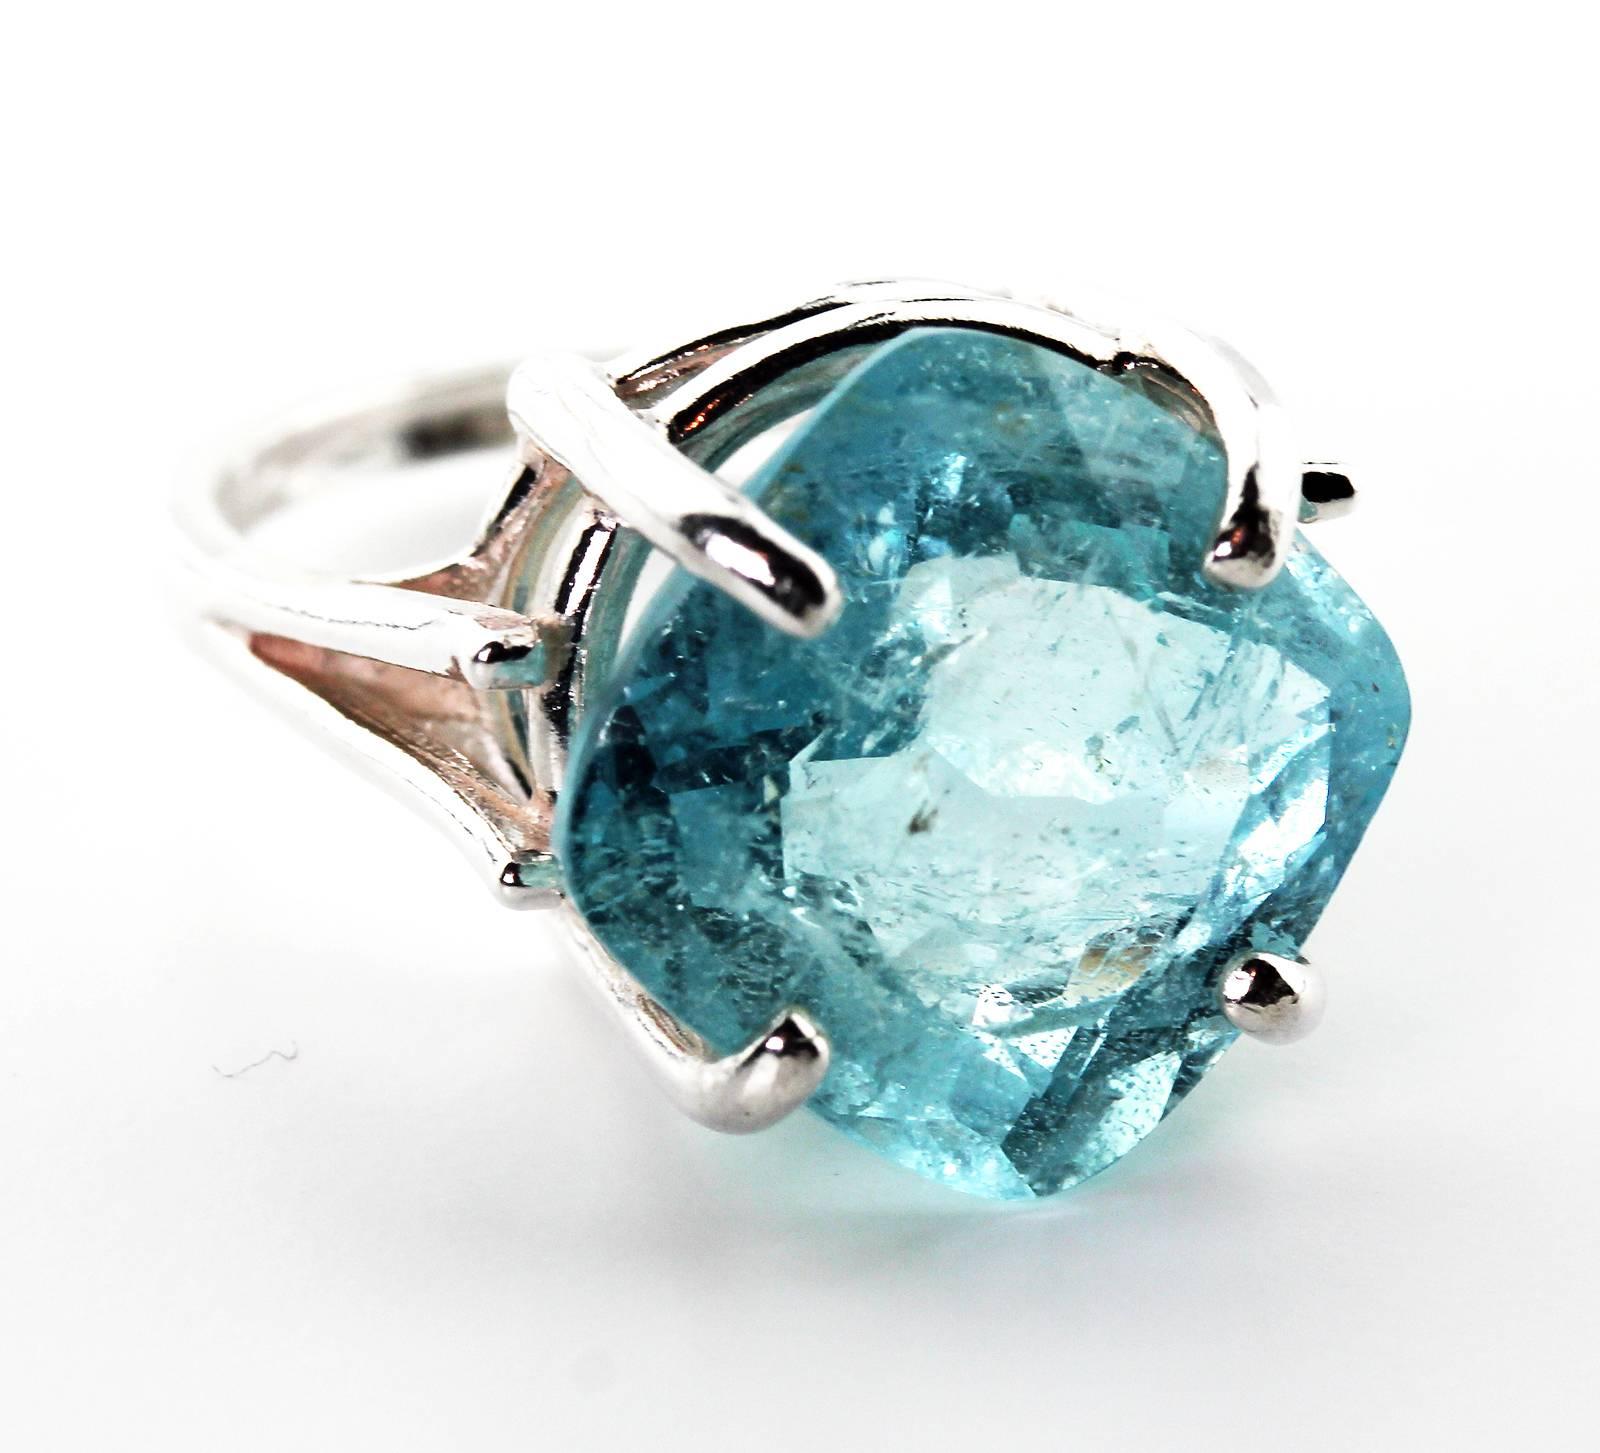 This lovely translucent bright blue 10.59 Carat square cushion cut Brasilian Aquamarine, measuring 13.5 mm x 13.5 mm, is set in a unique Sterling Silver ring size 7 (sizable).  More from this seller by putting gemjunky into 1stdibs search bar.